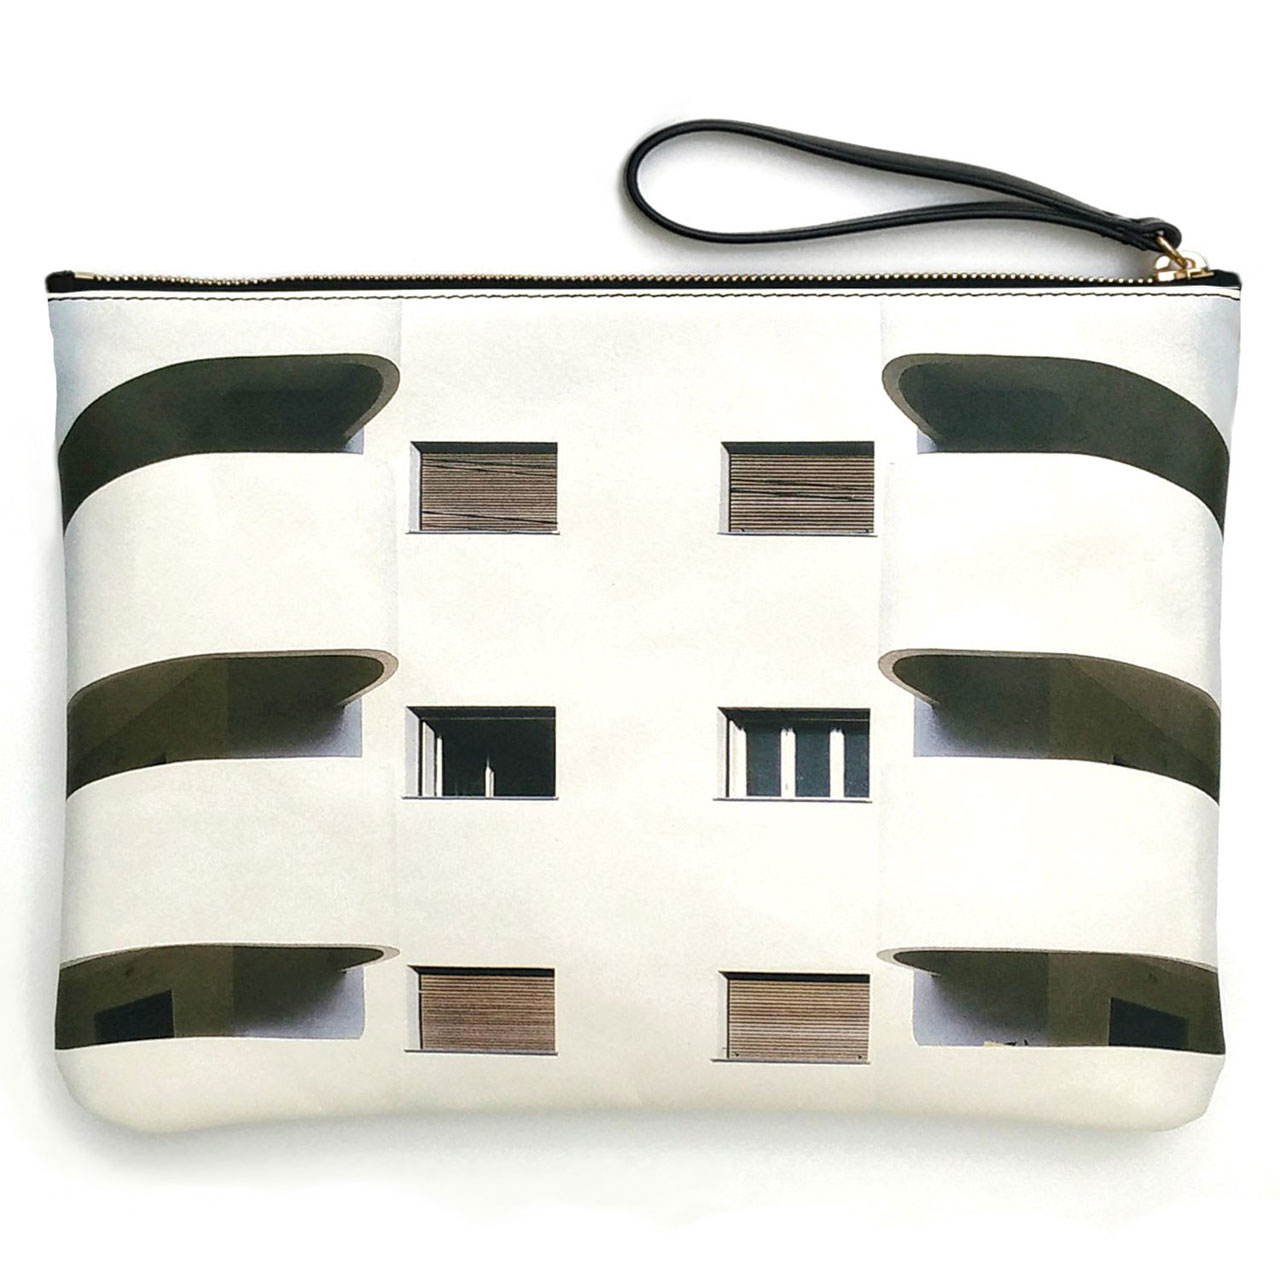 Shoulder bag "Busy City | BAUHAUS 2" in calf skin leather, digital printed with removable and adjustable shoulder strap by Passerin-nonpareil / Adrian Cruz Chavez, Carolina Jimenez Andrioli and Francesca Neri.​